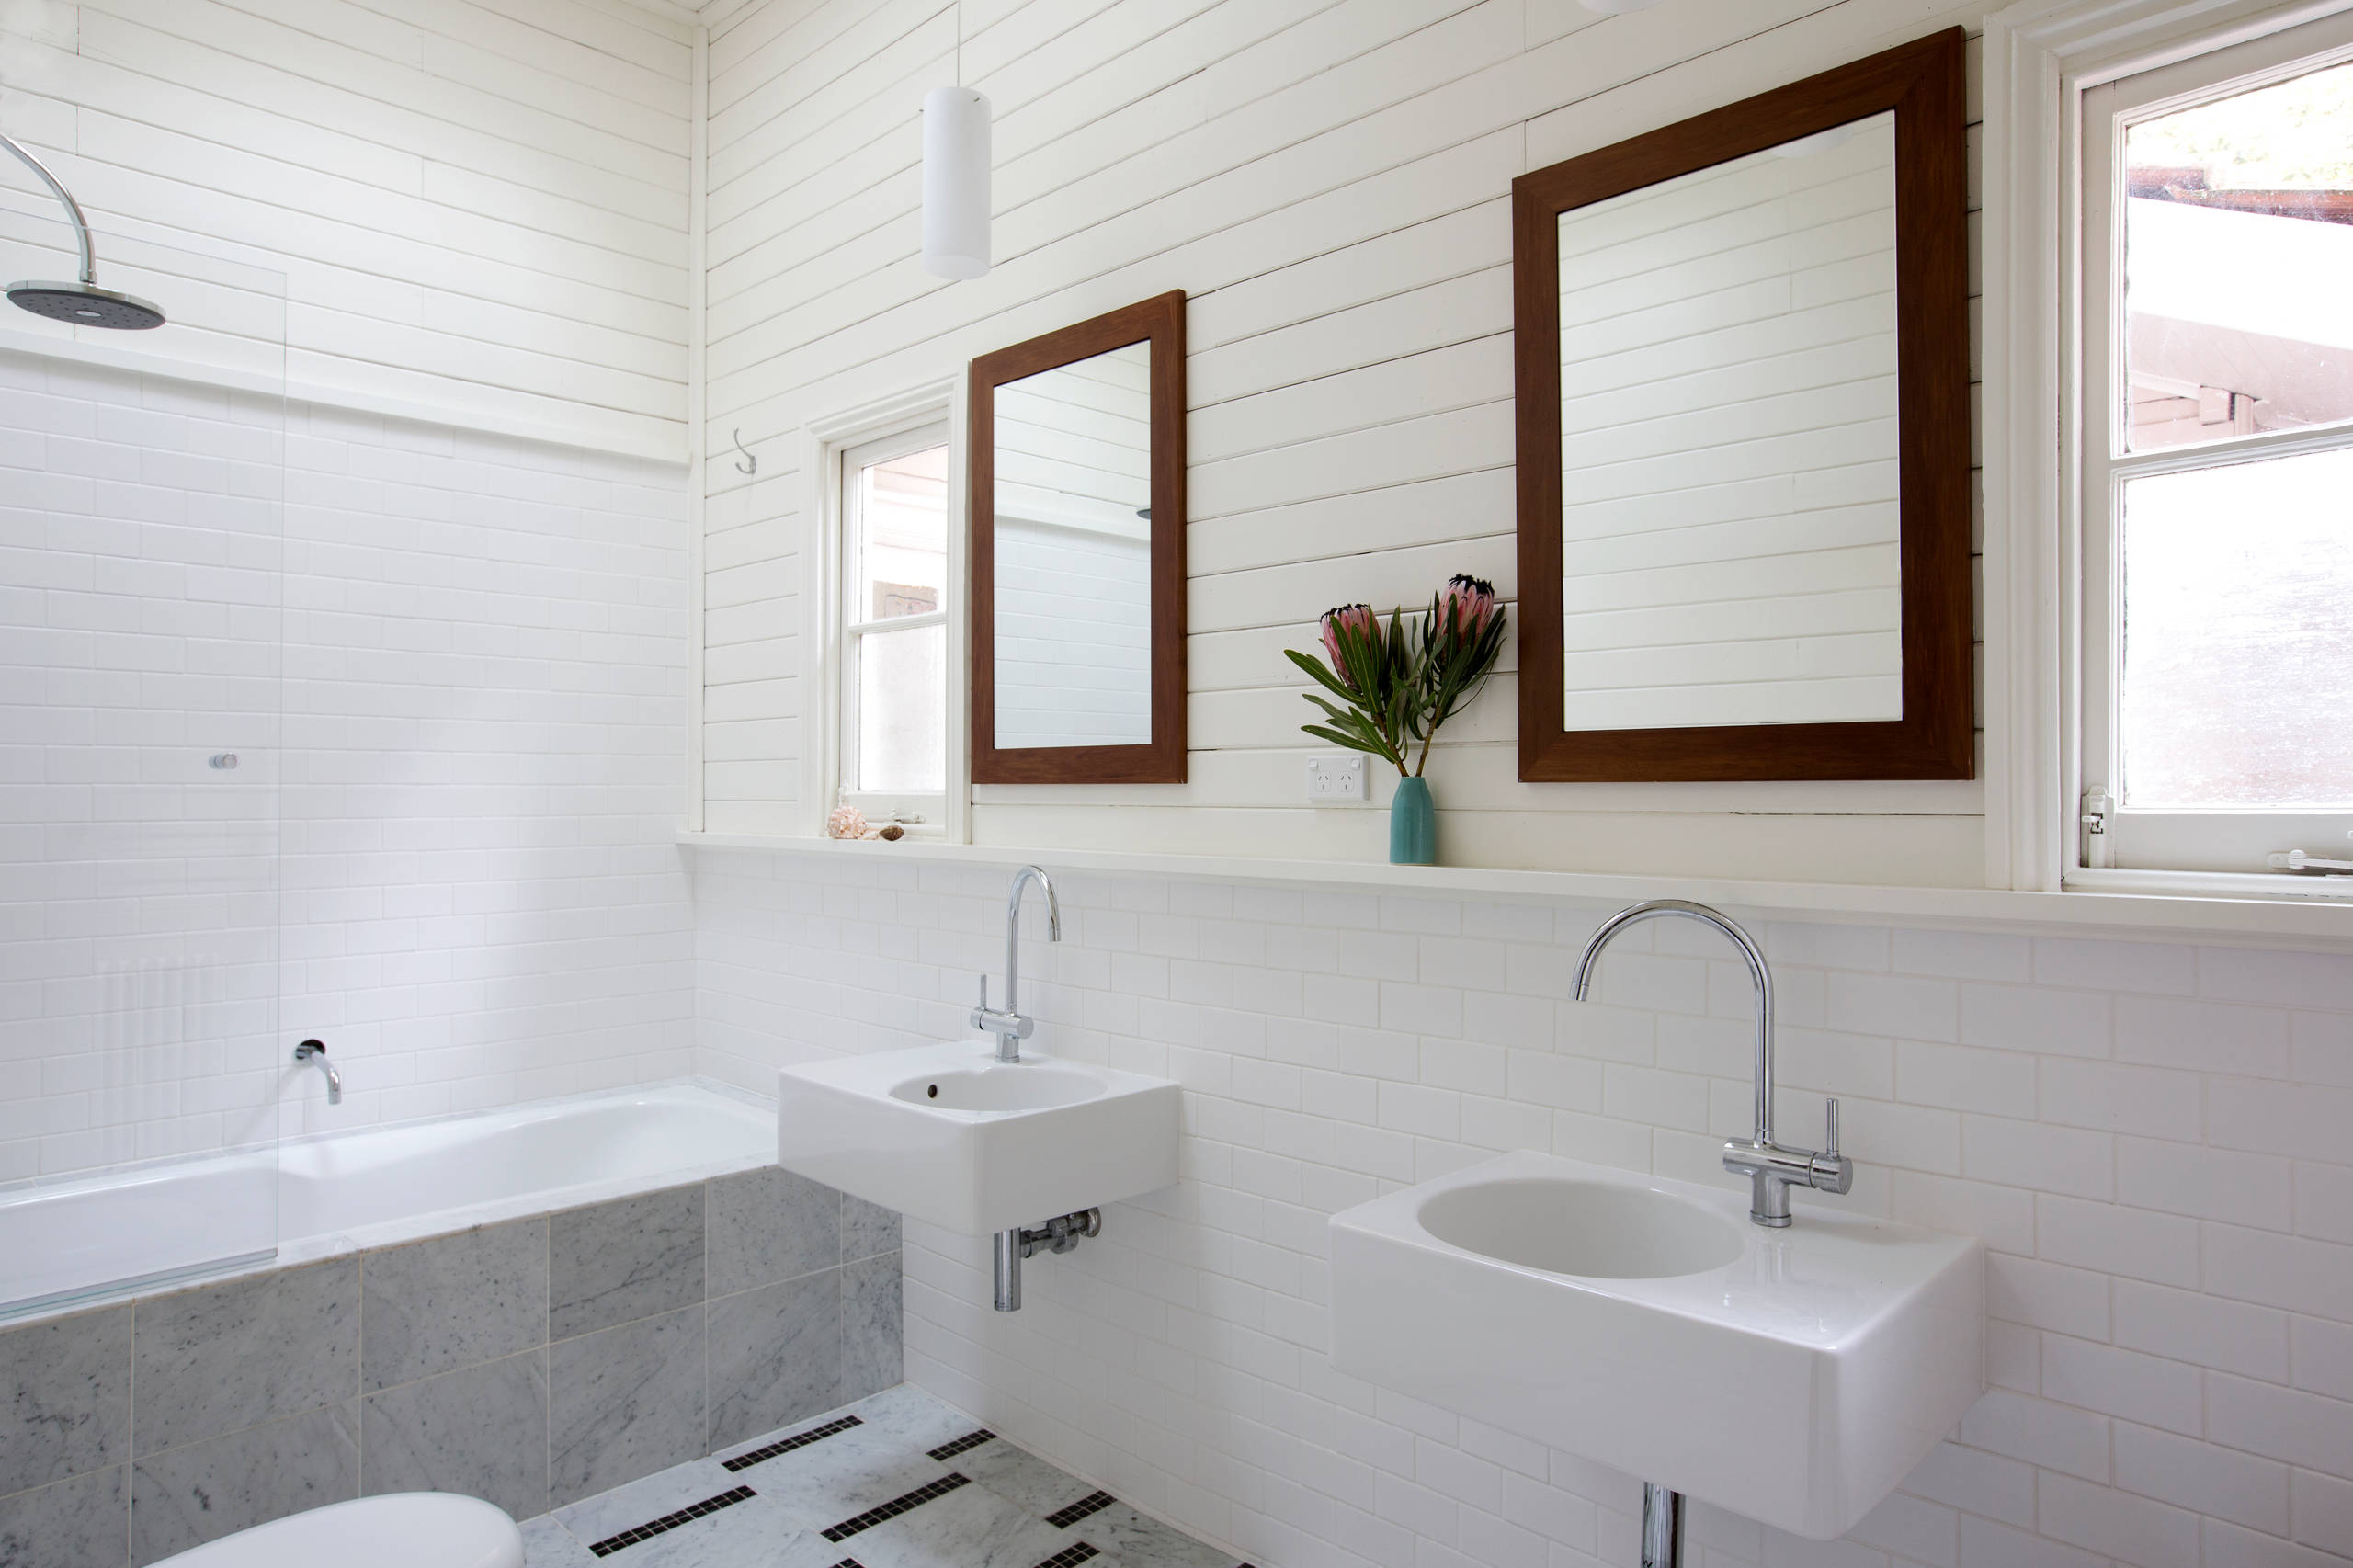 11 Times a Bathroom Basin With an Exposed Bottle Trap Looked Ace | Houzz UK